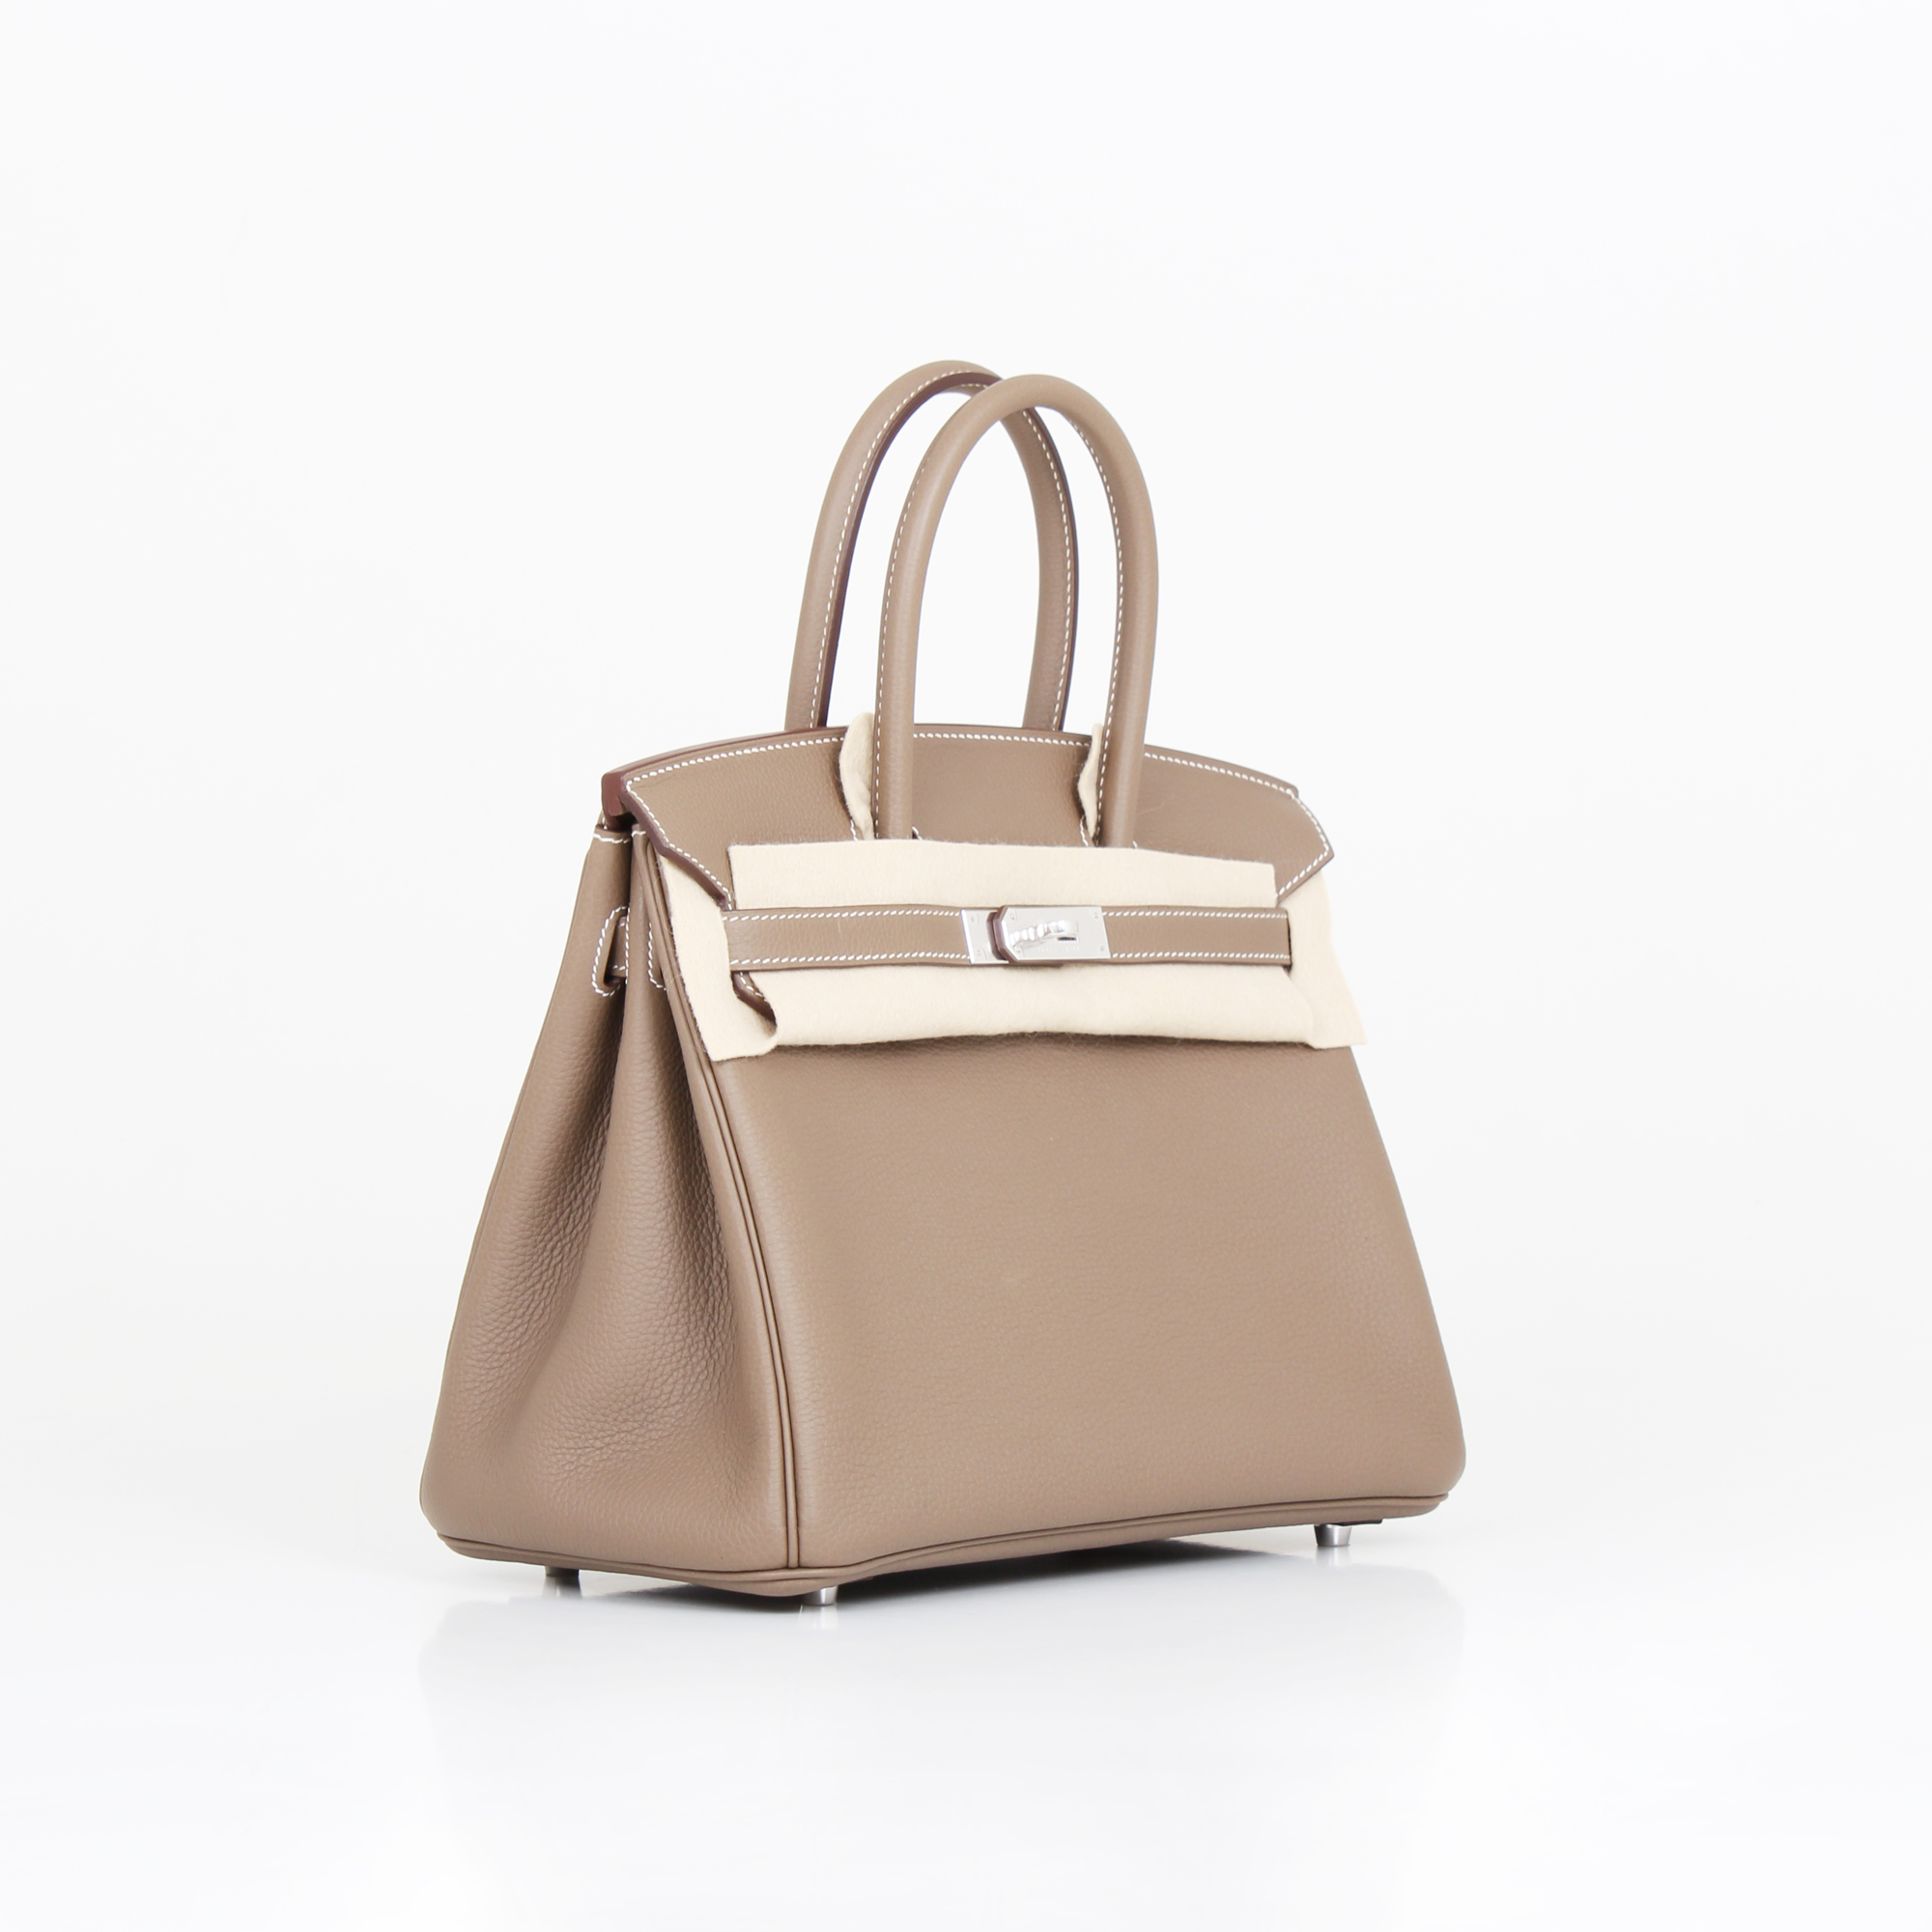 General image of hermes birkin bag taupe togo with protective cloth